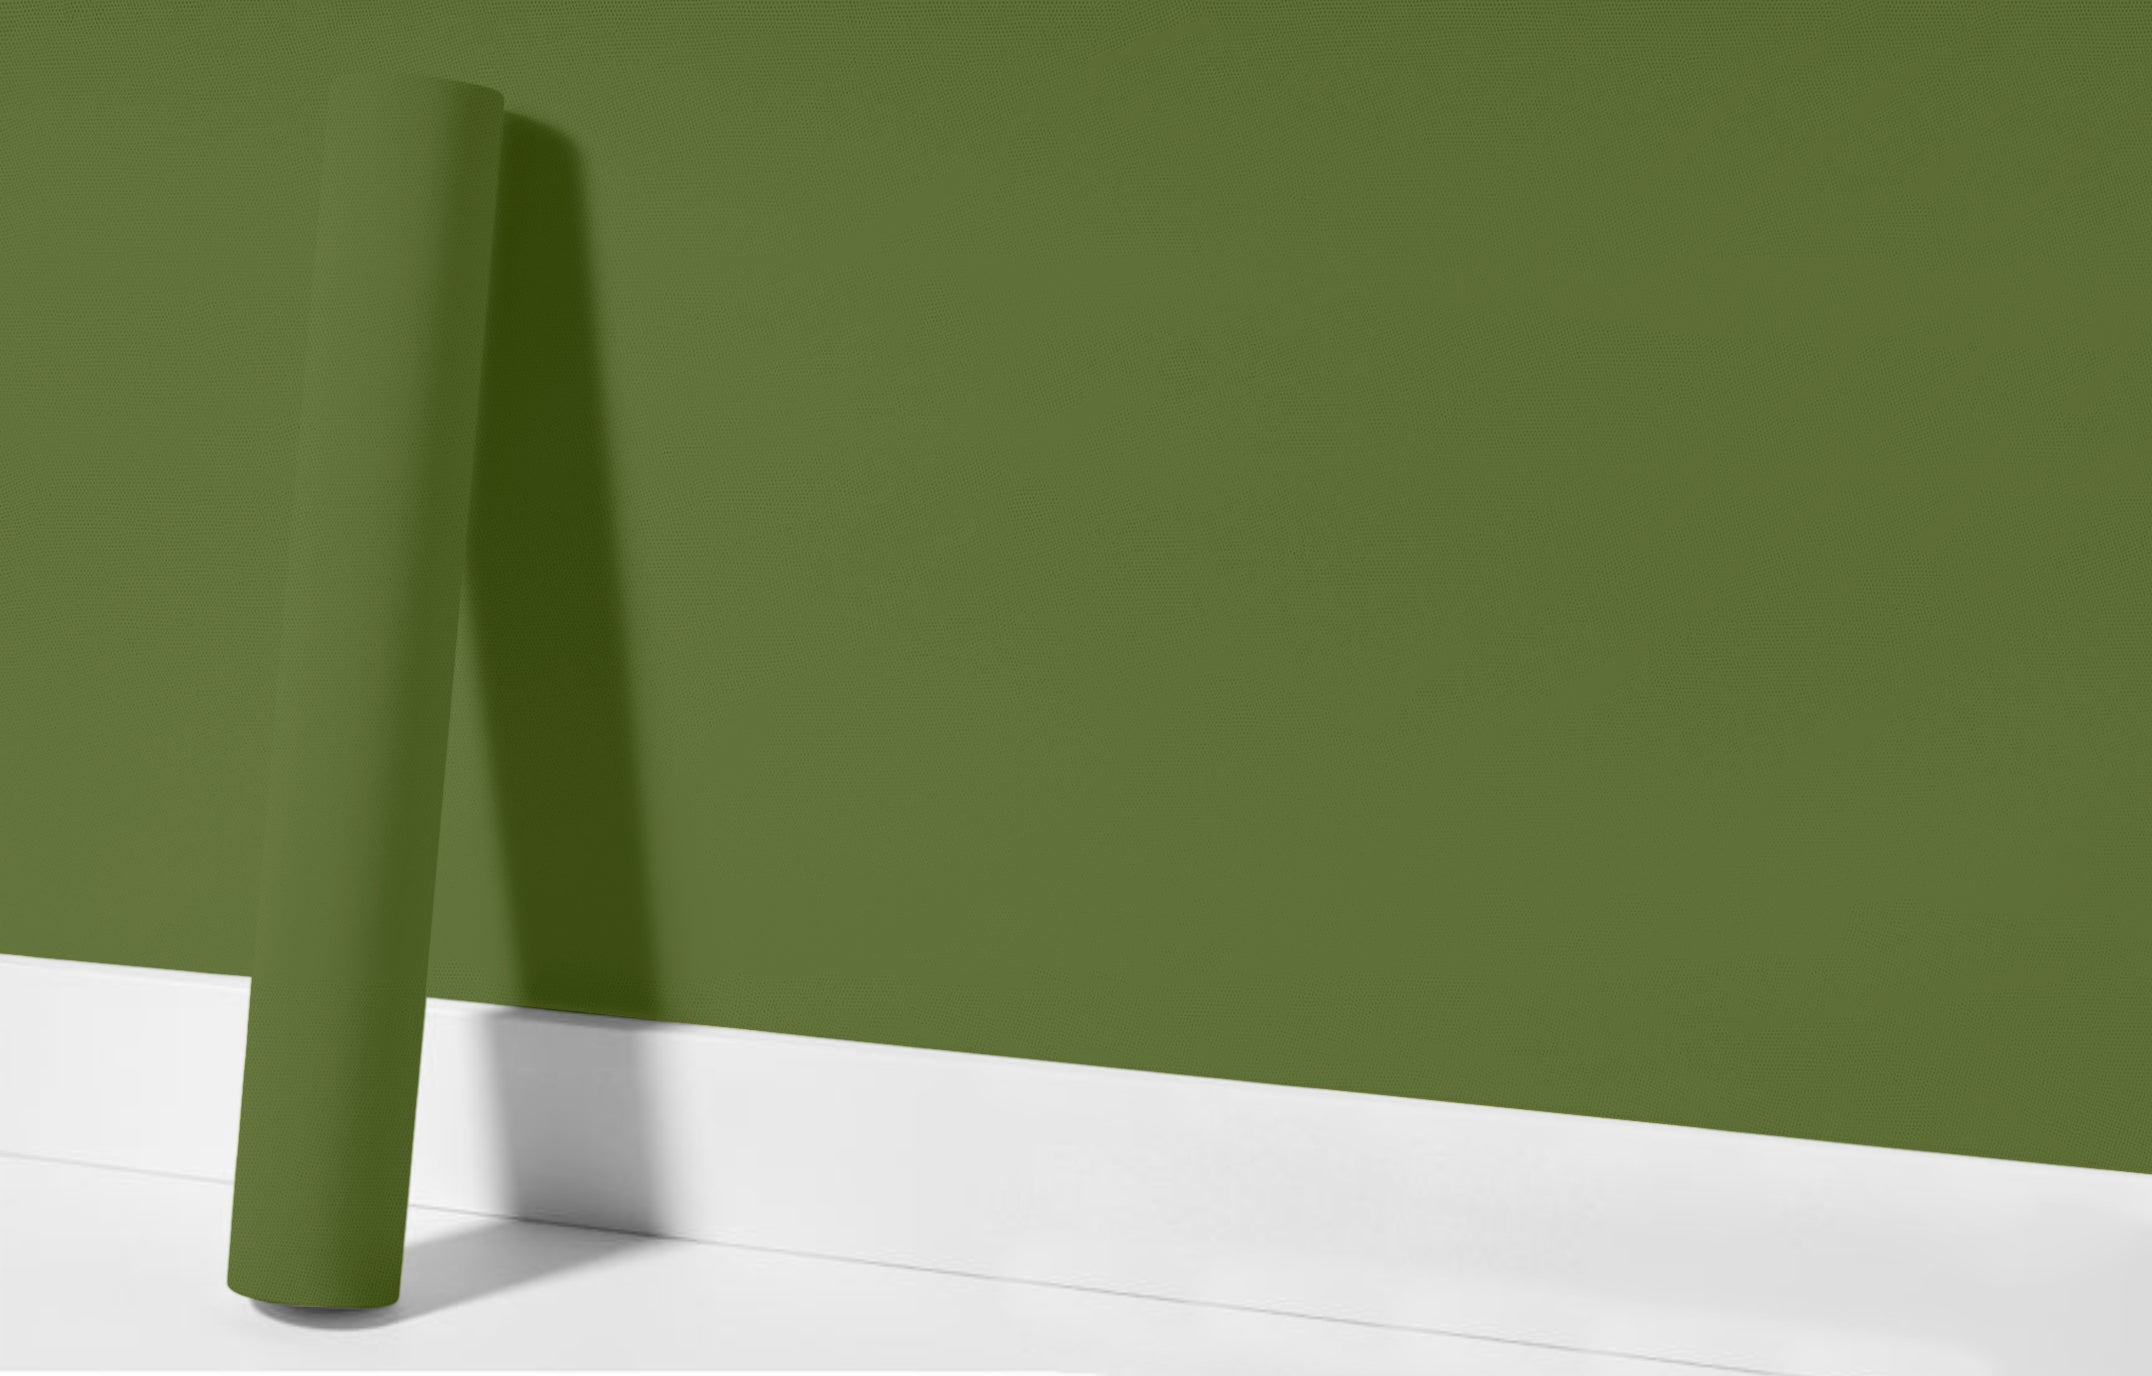 Peel & Stick Removable Re-usable Paint - Color RAL 6025 Fern Green - offRAL™ - RALRAW LLC, USA